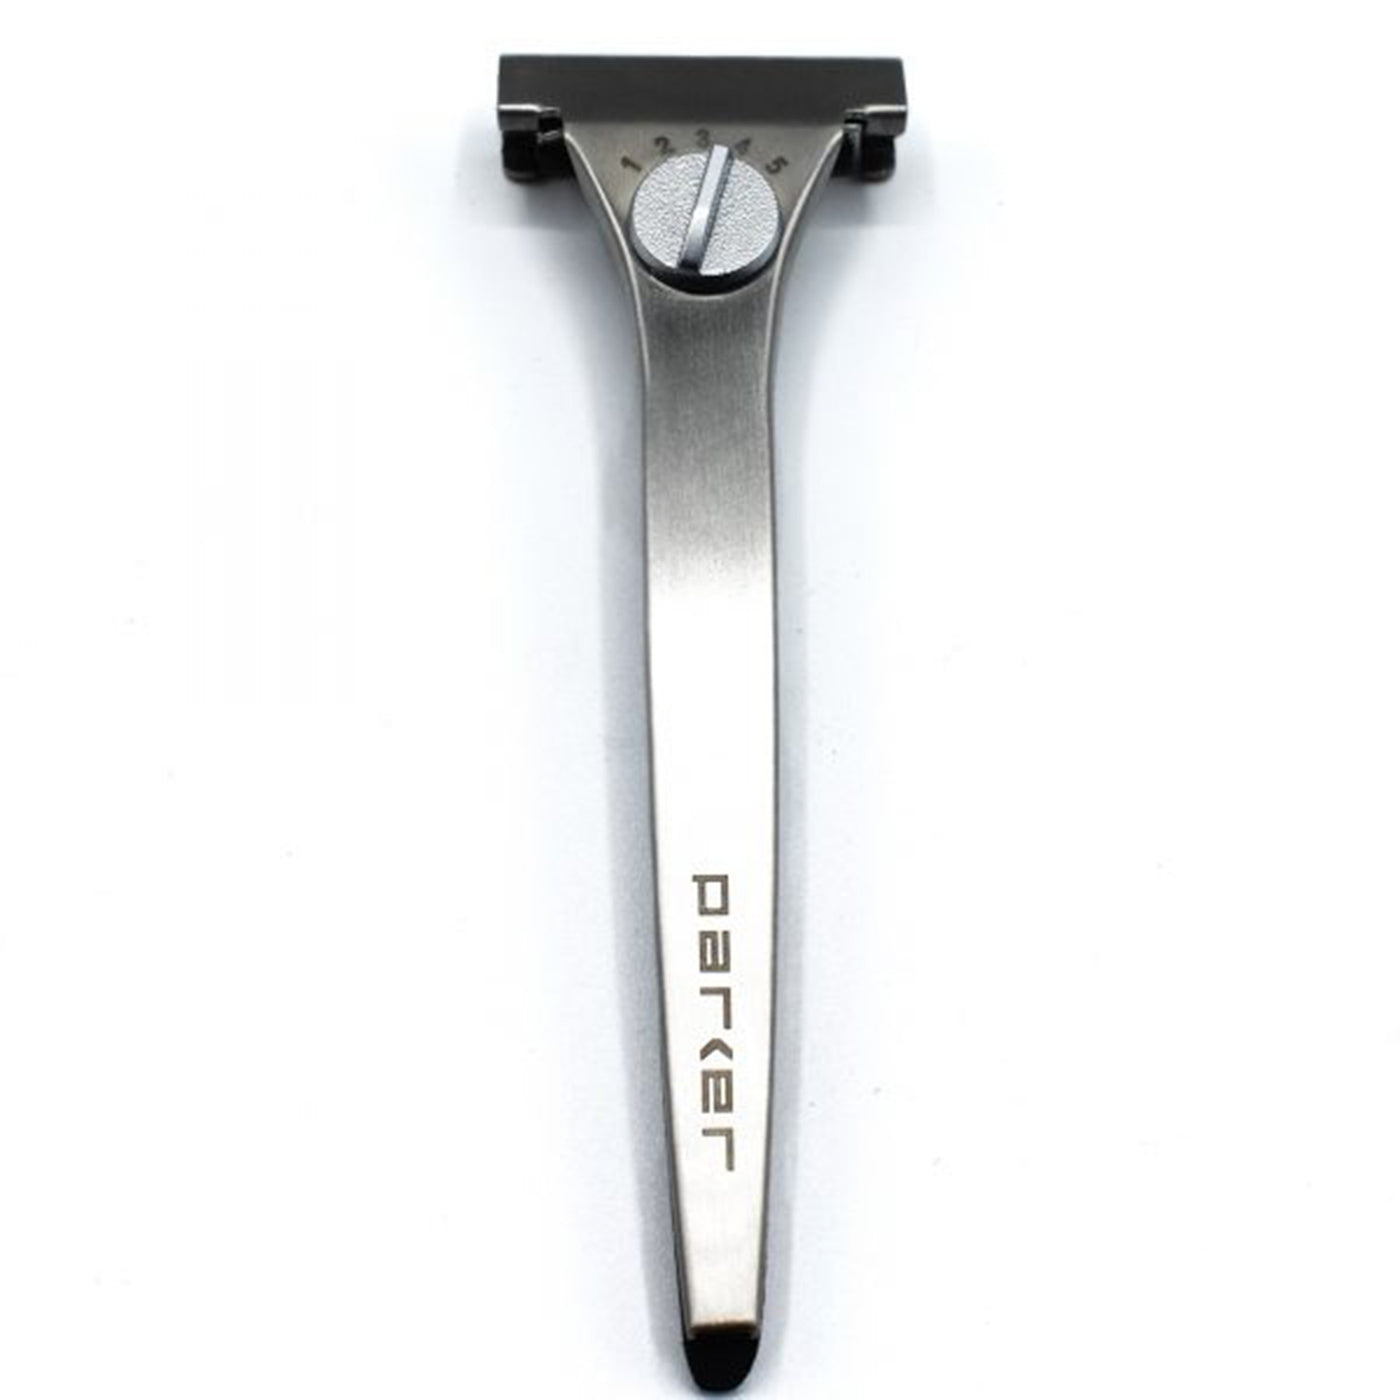  Parker Adjustable Injector Razor by Parker sold by Naked Armor Razors